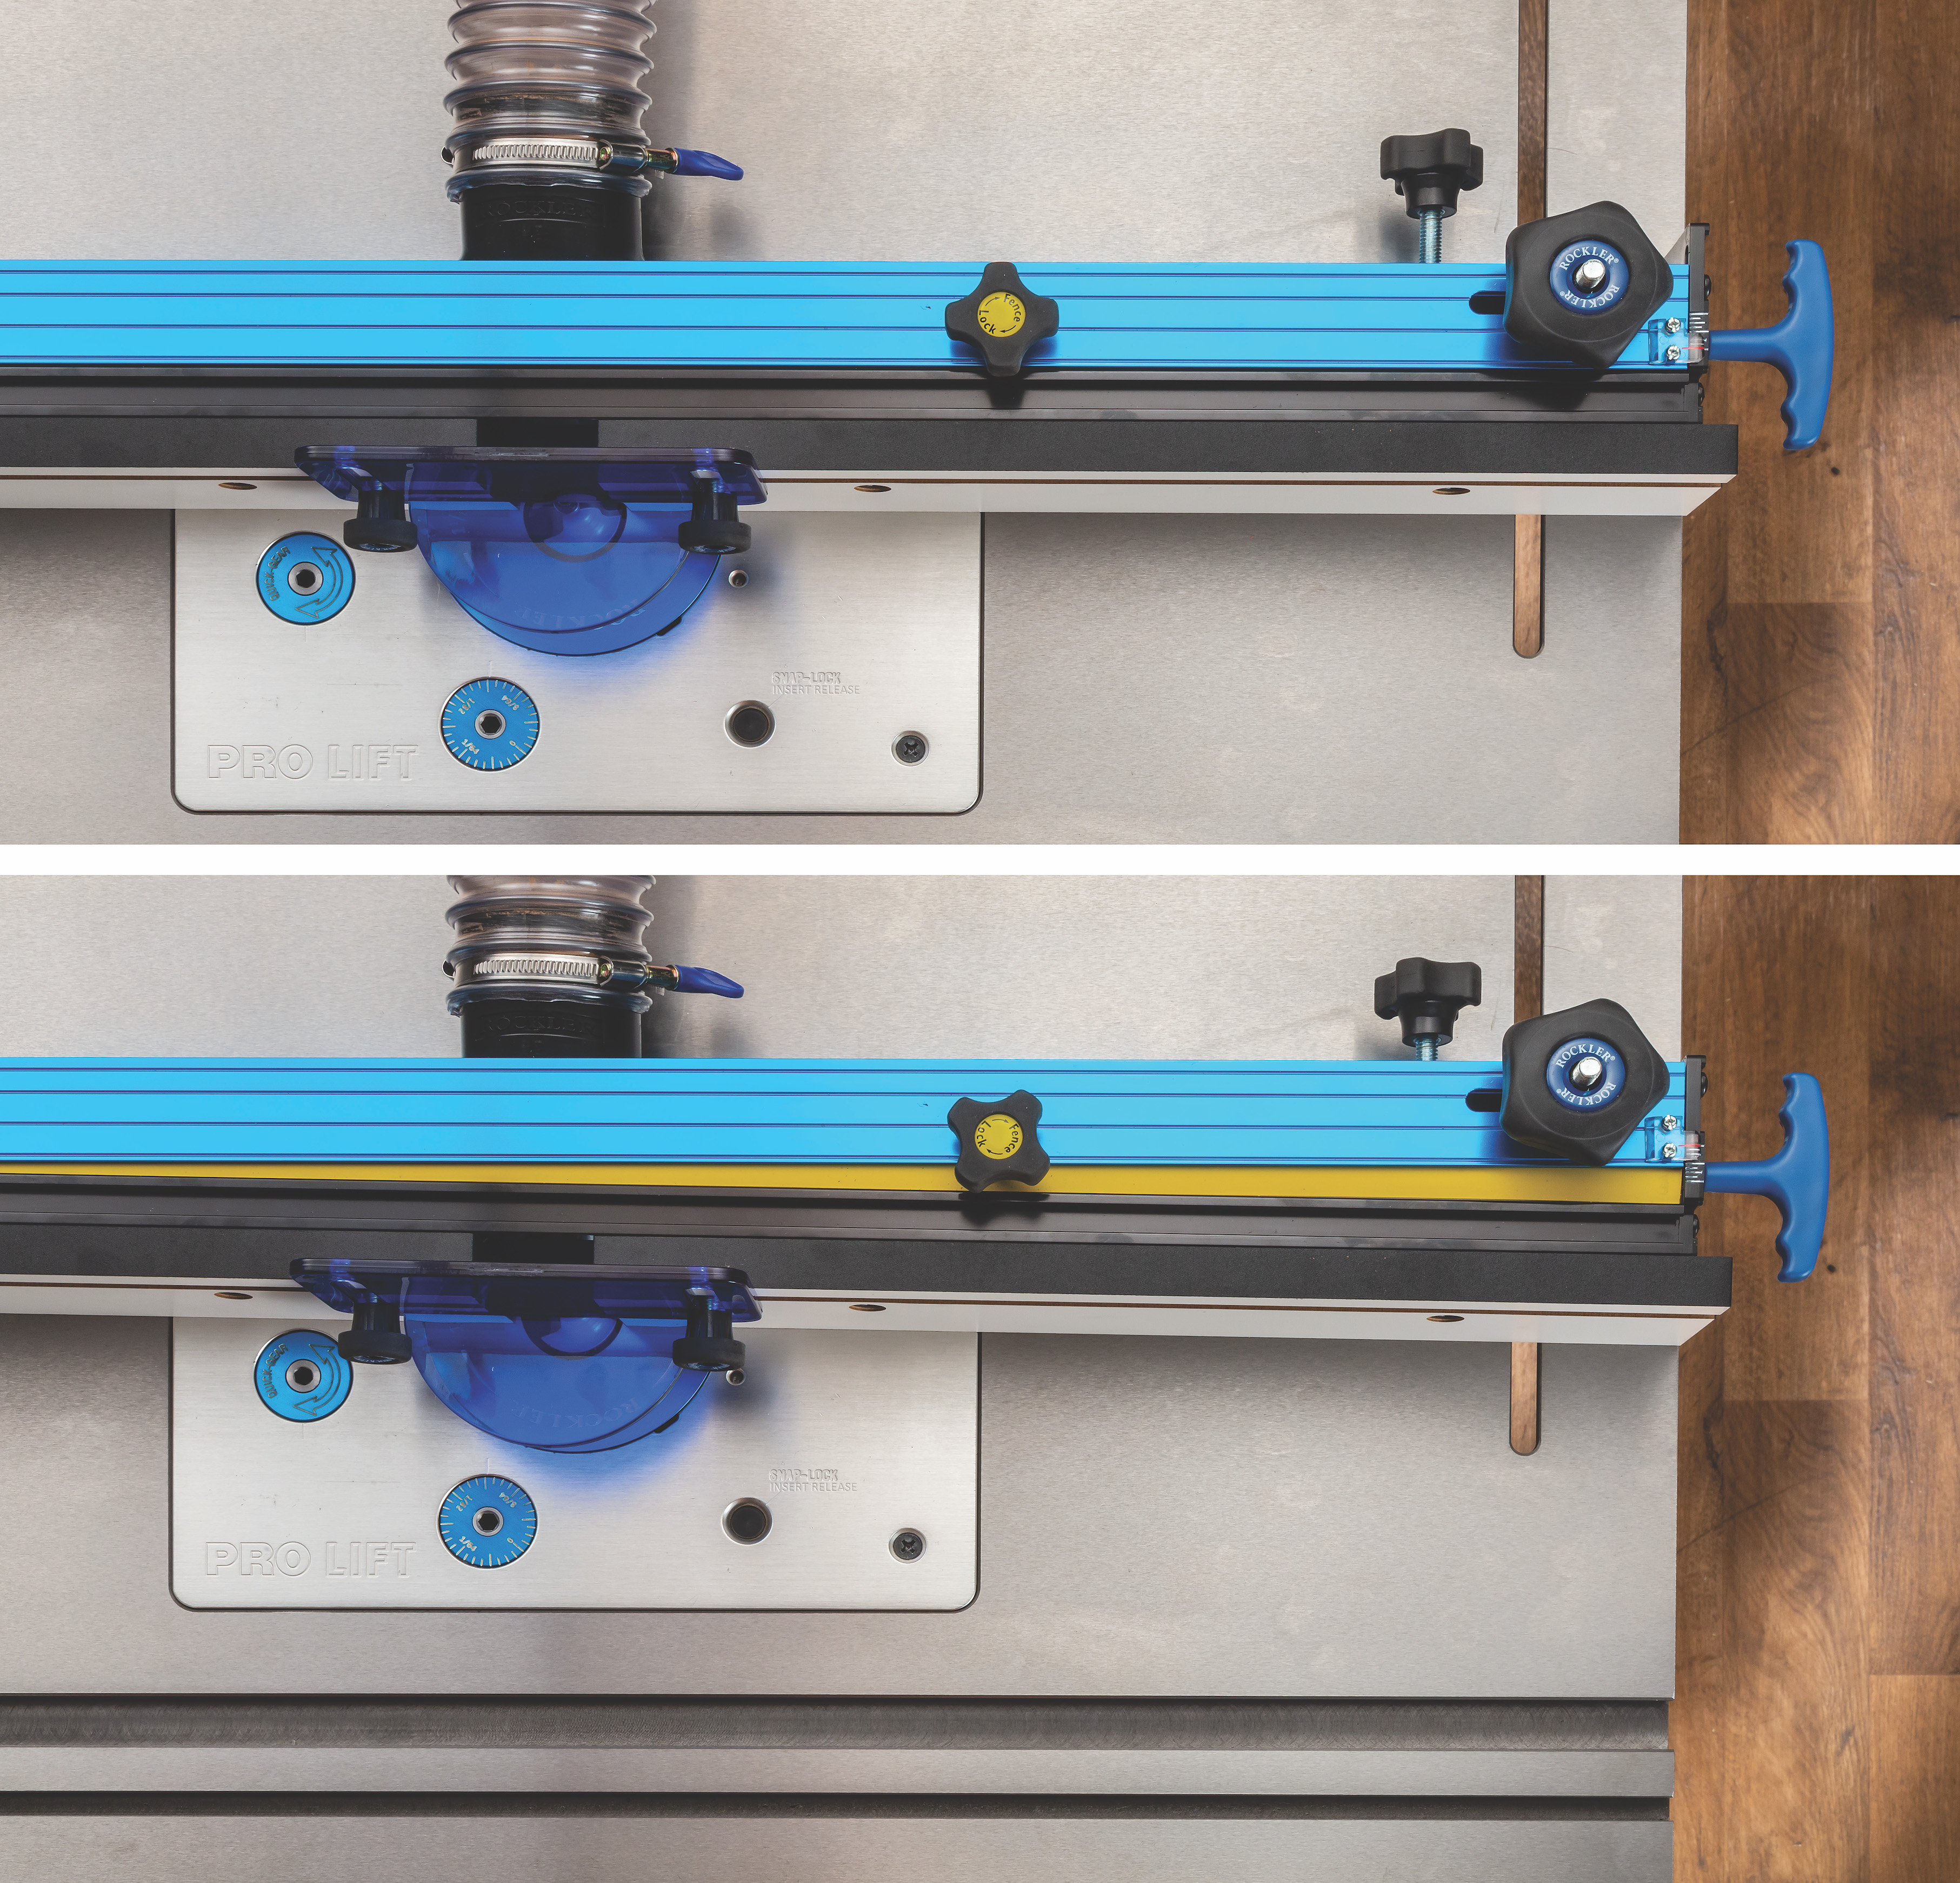 Rockler introduces first router table fence that allows  micro-adjustments of face even after fence is locked down